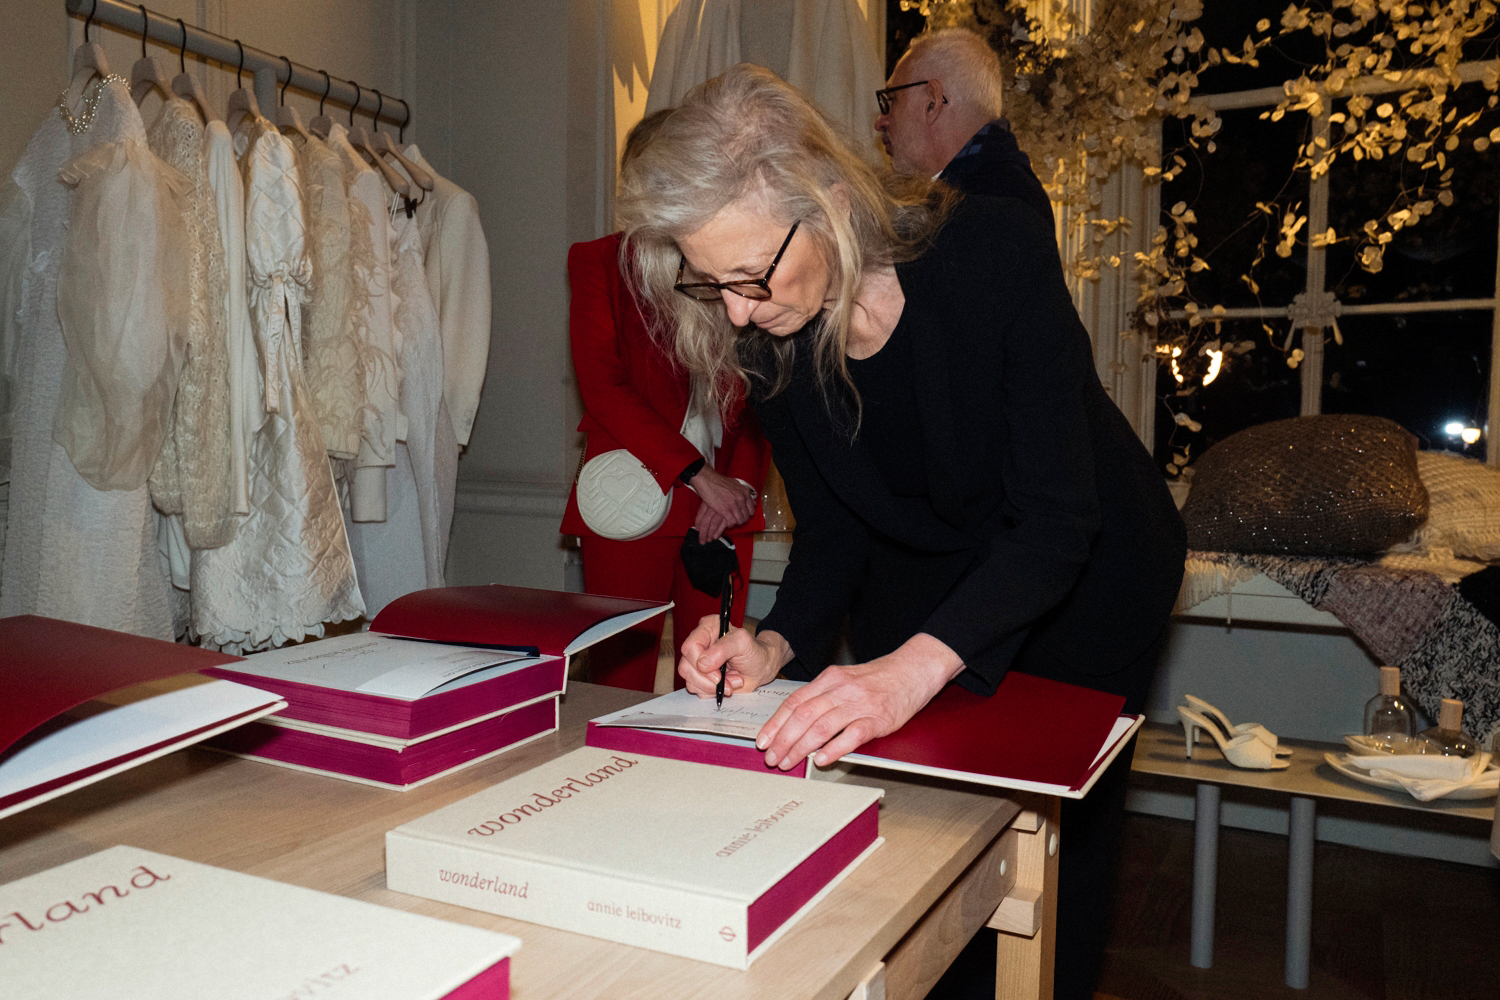 Annie Leibovitz dedicating books for friends at MATCHESFASHION, 5 Carlos Place - photo James D. Kelly